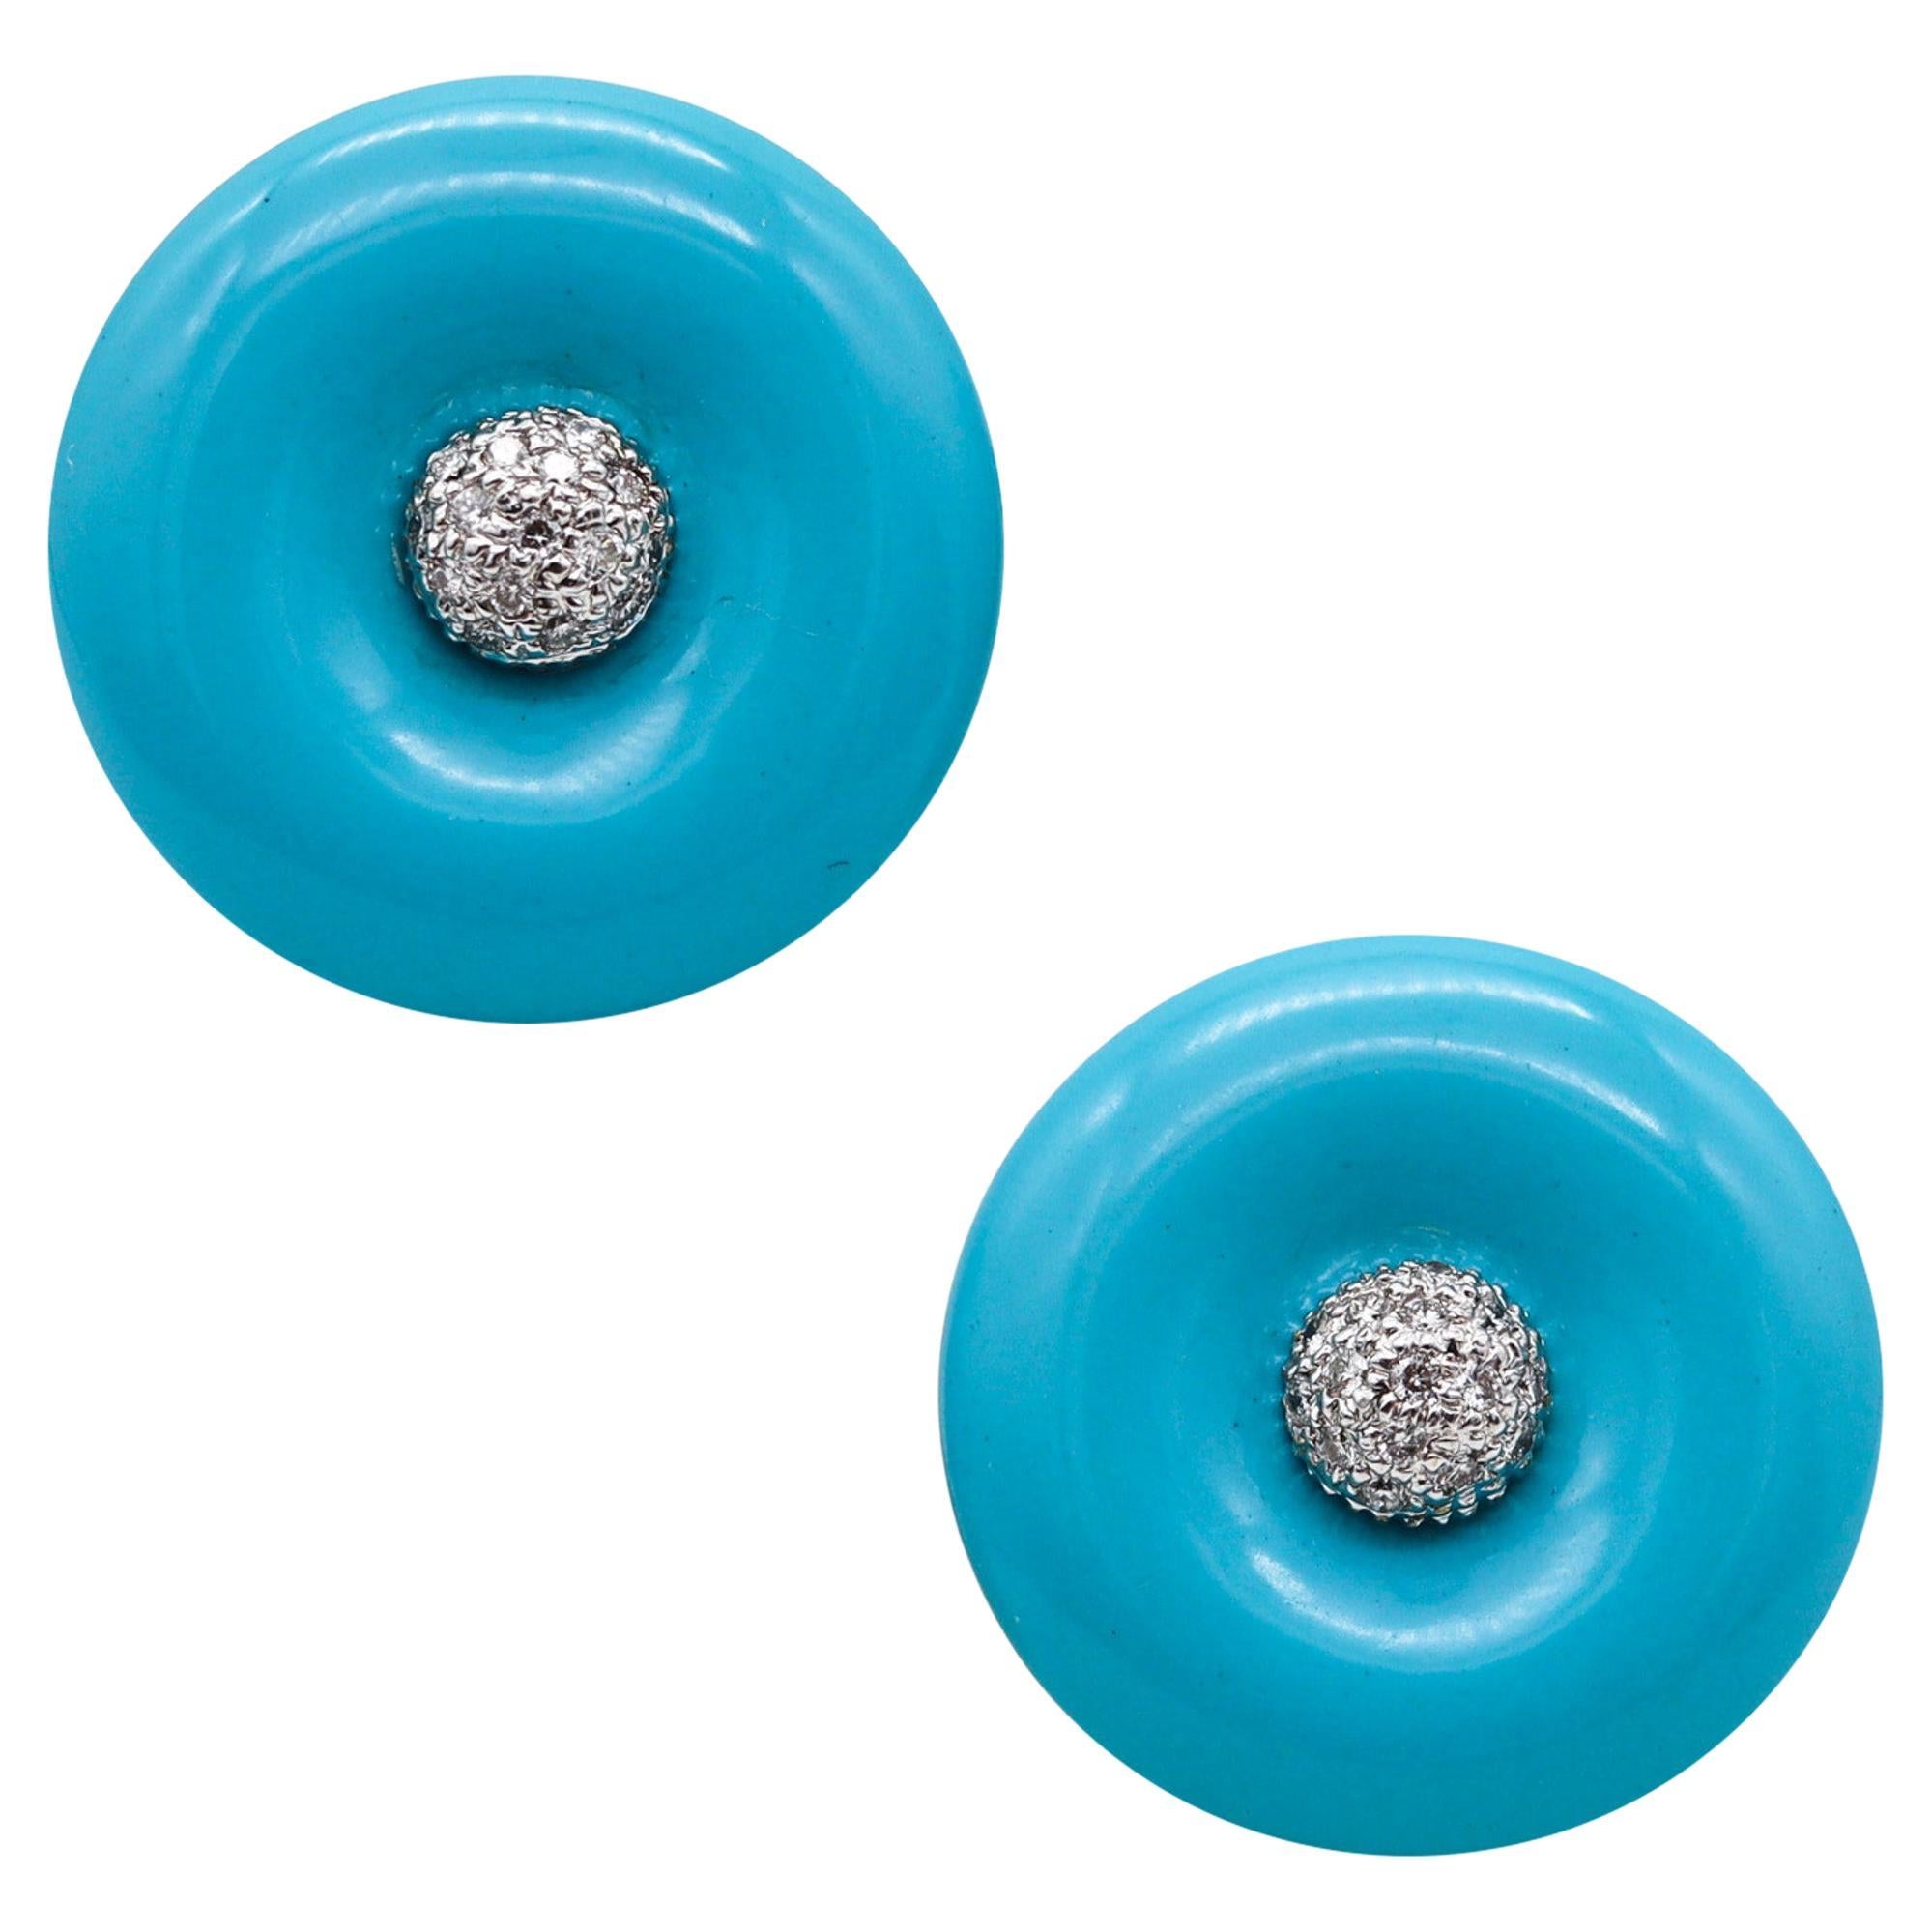 Modernist Round Carved Turquoise Earrings In 18Kt White Gold With VS Diamonds